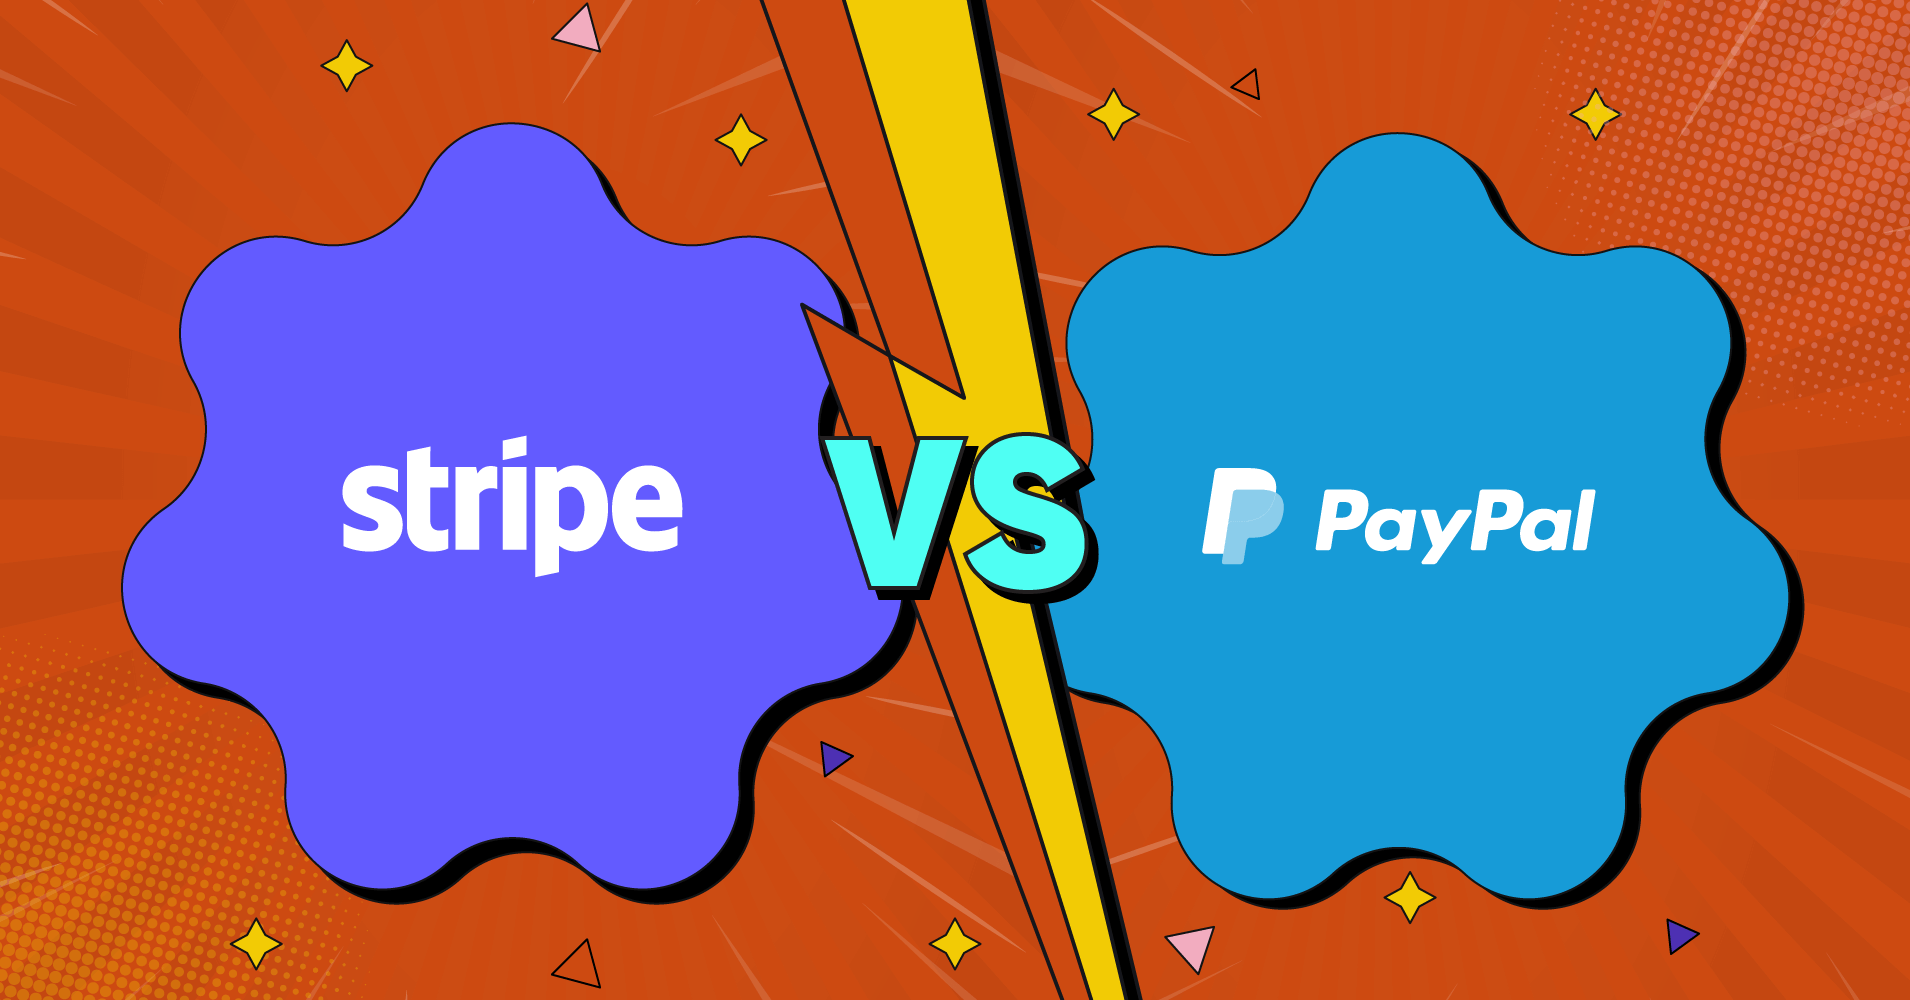 Stripe vs. PayPal: Which is better